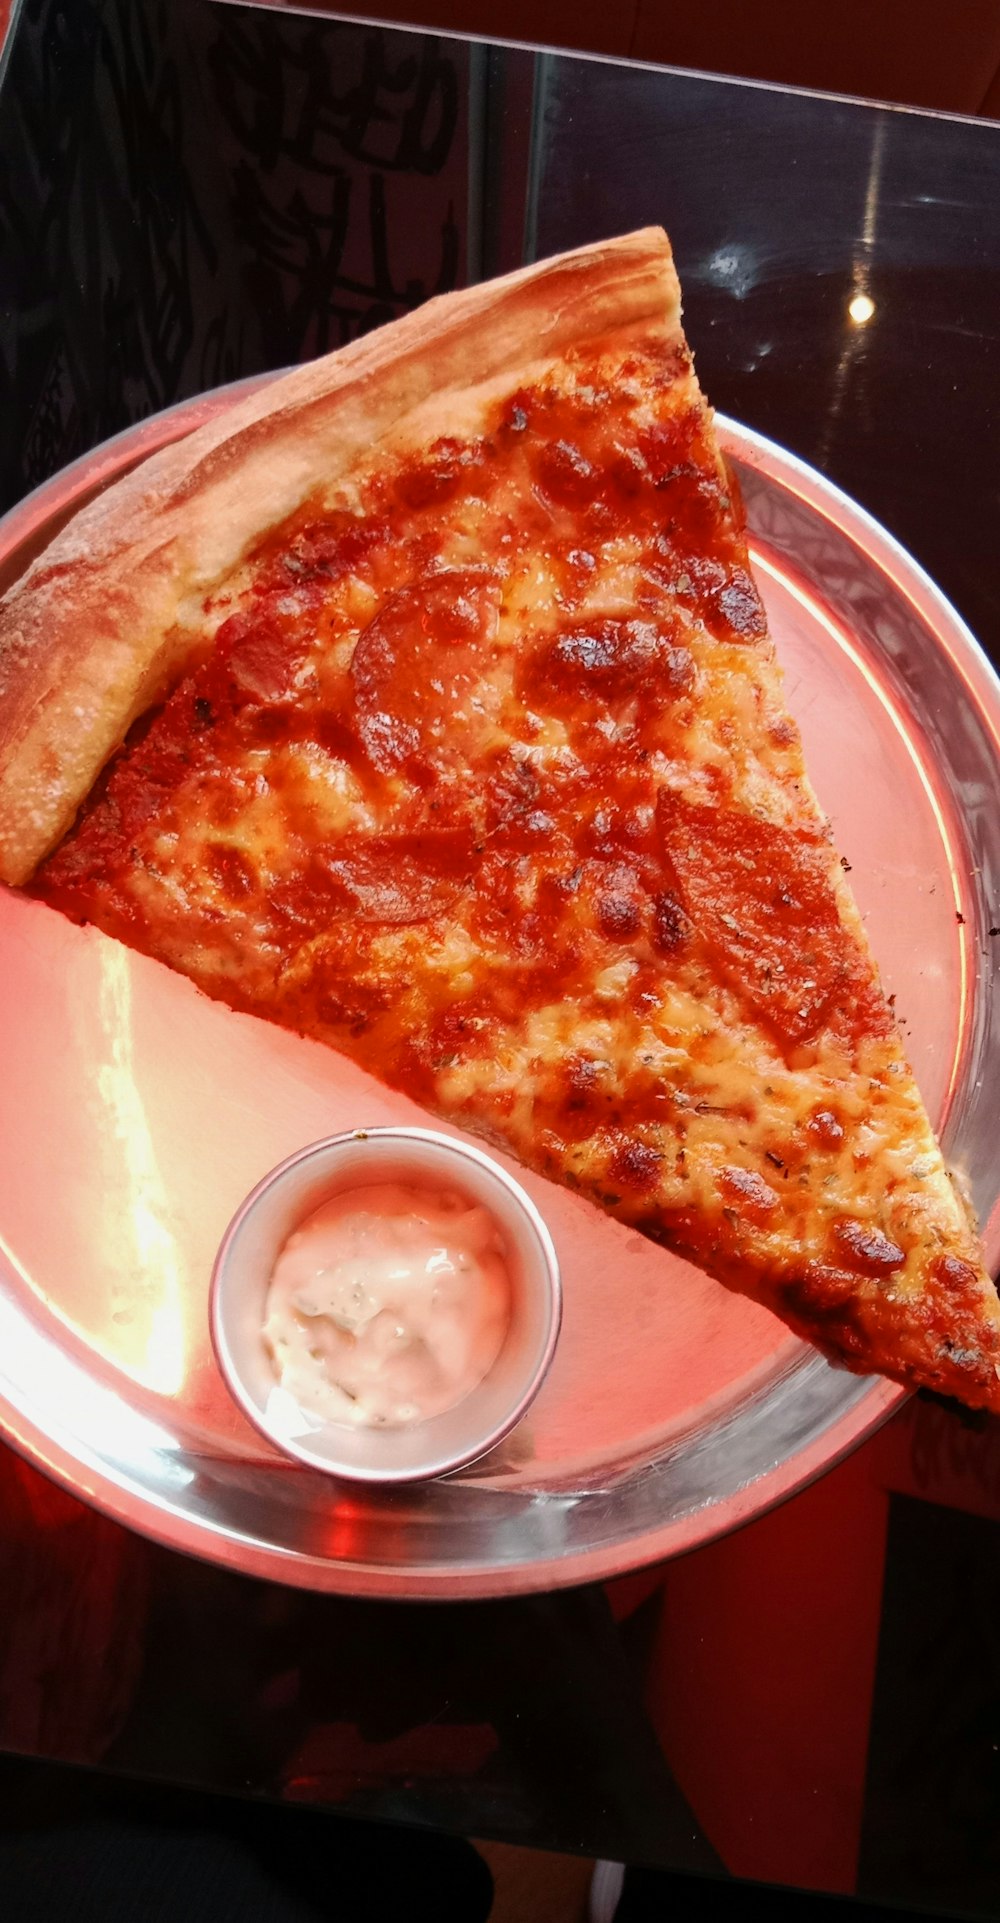 a slice of pizza on a pink plate